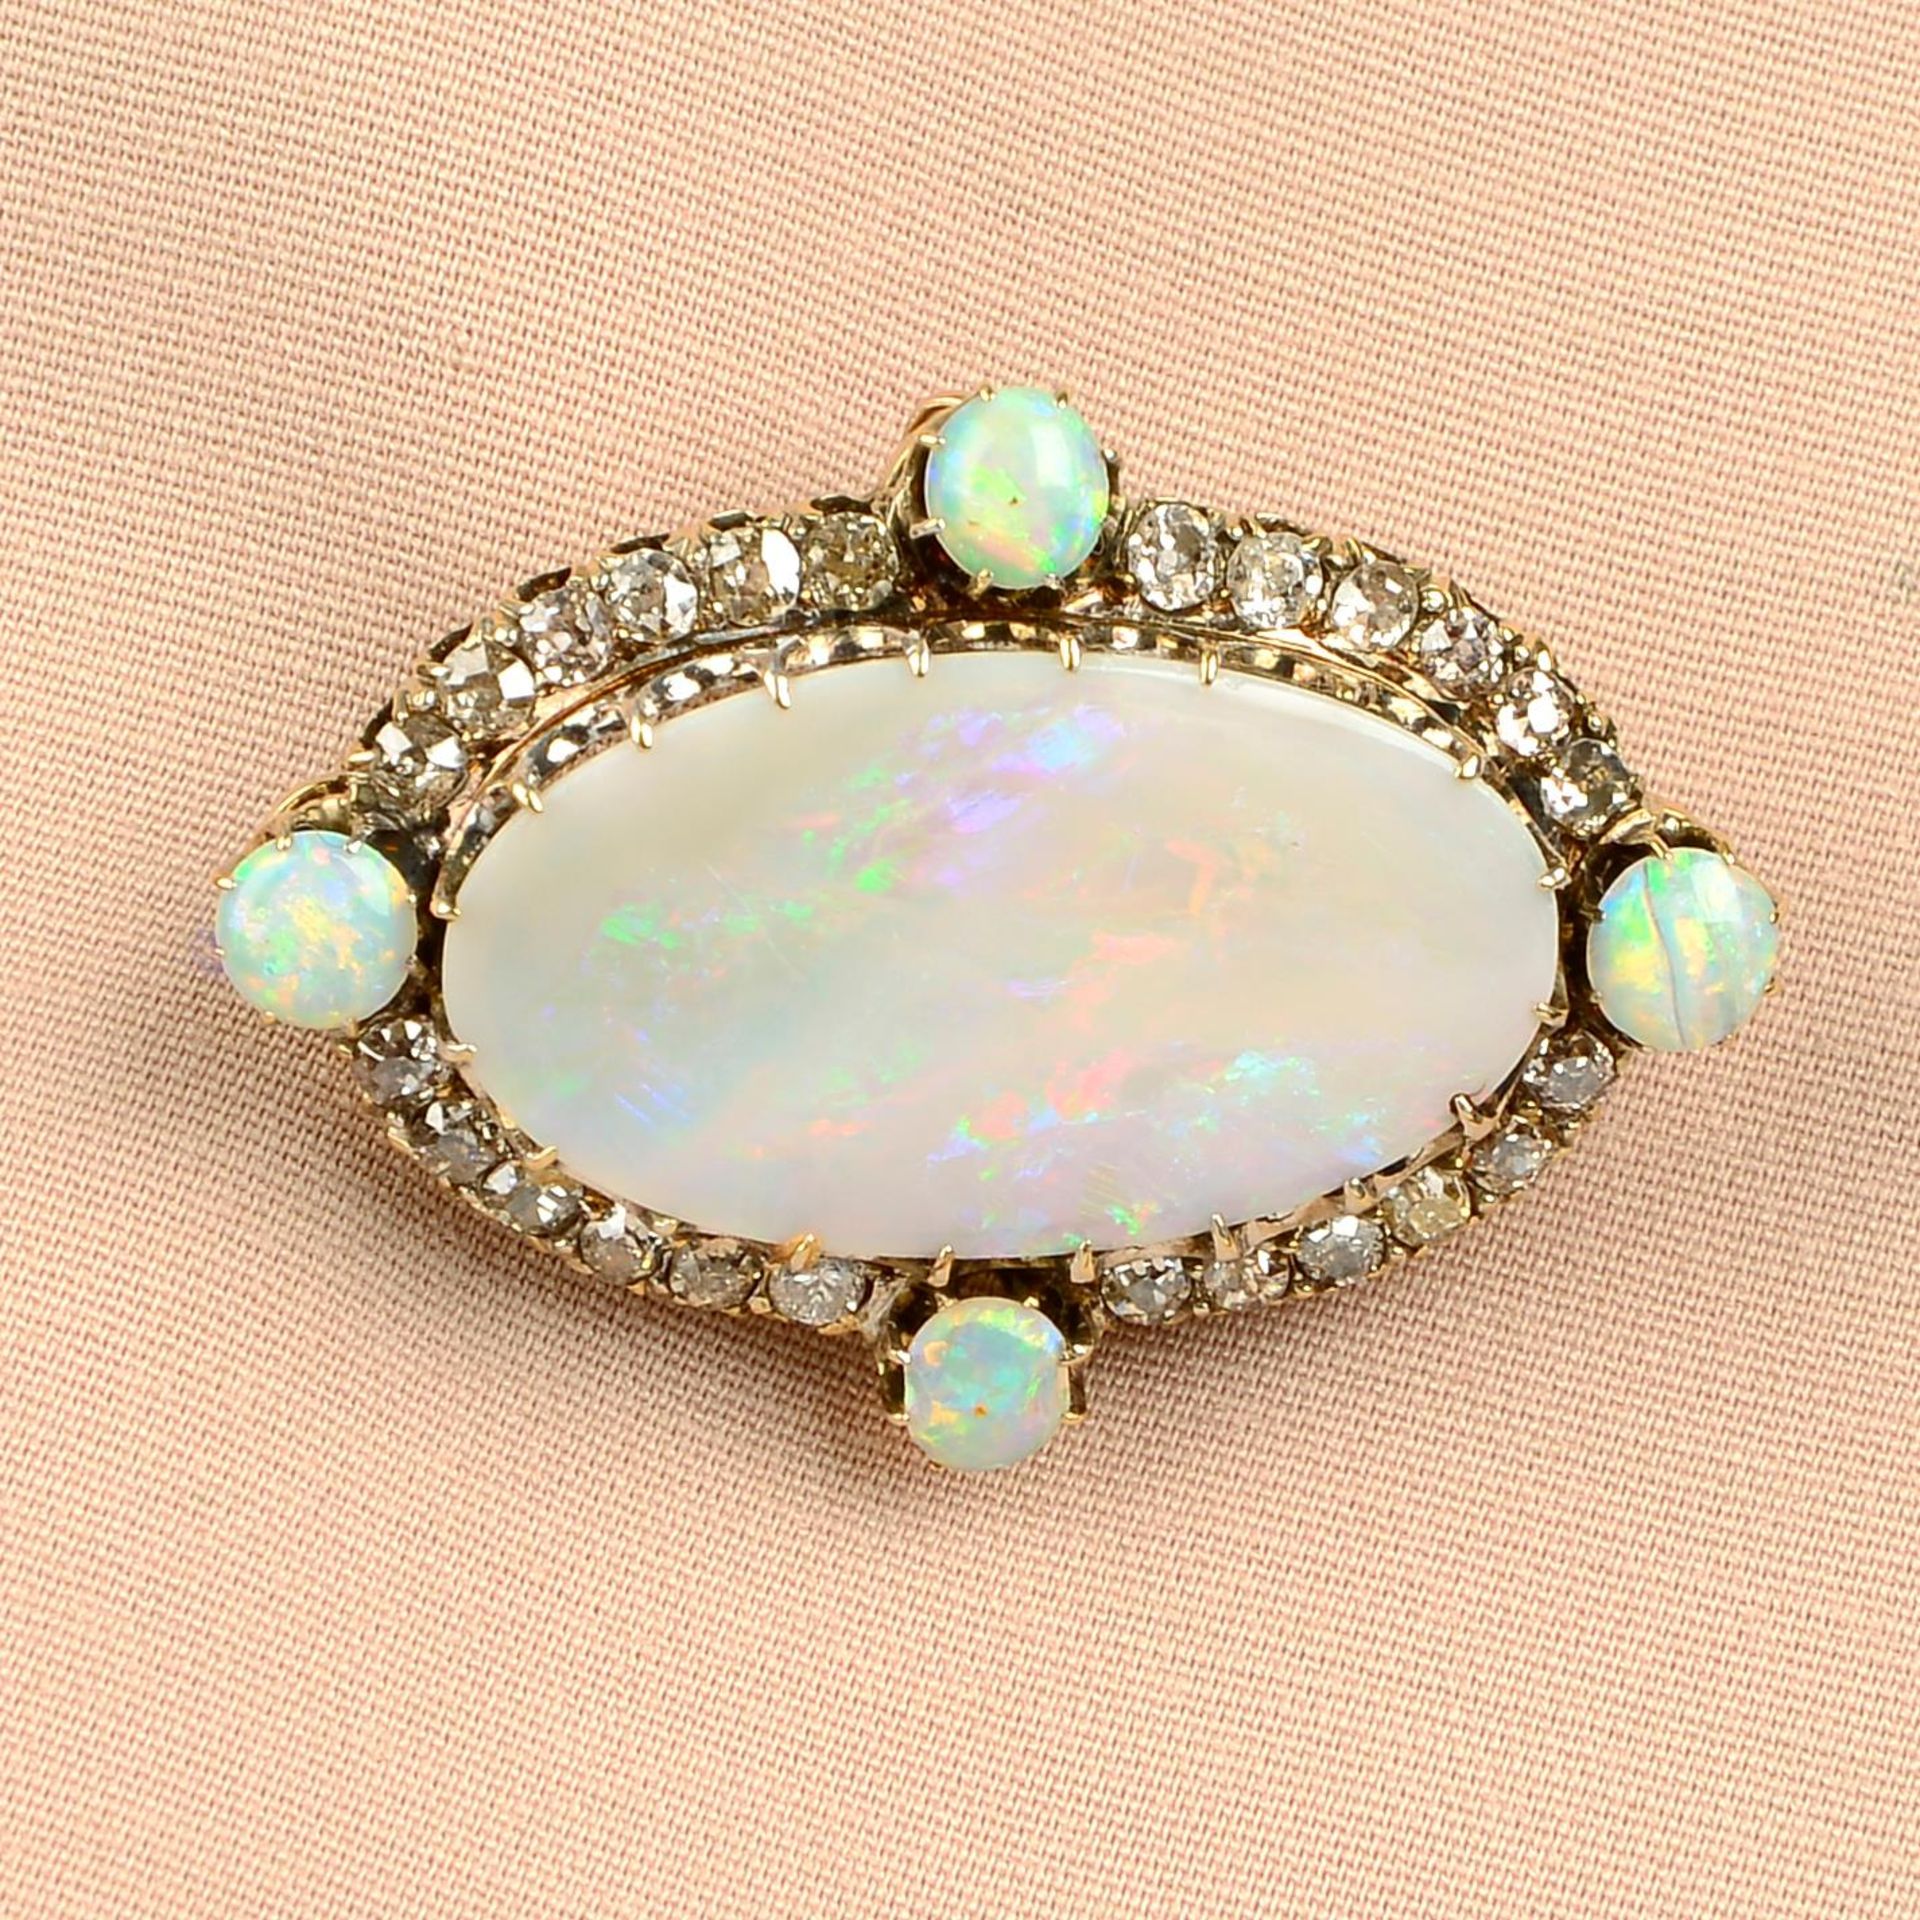 A late Victorian 15ct gold opal and old-cut diamond brooch.Estimated dimensions of principal opal